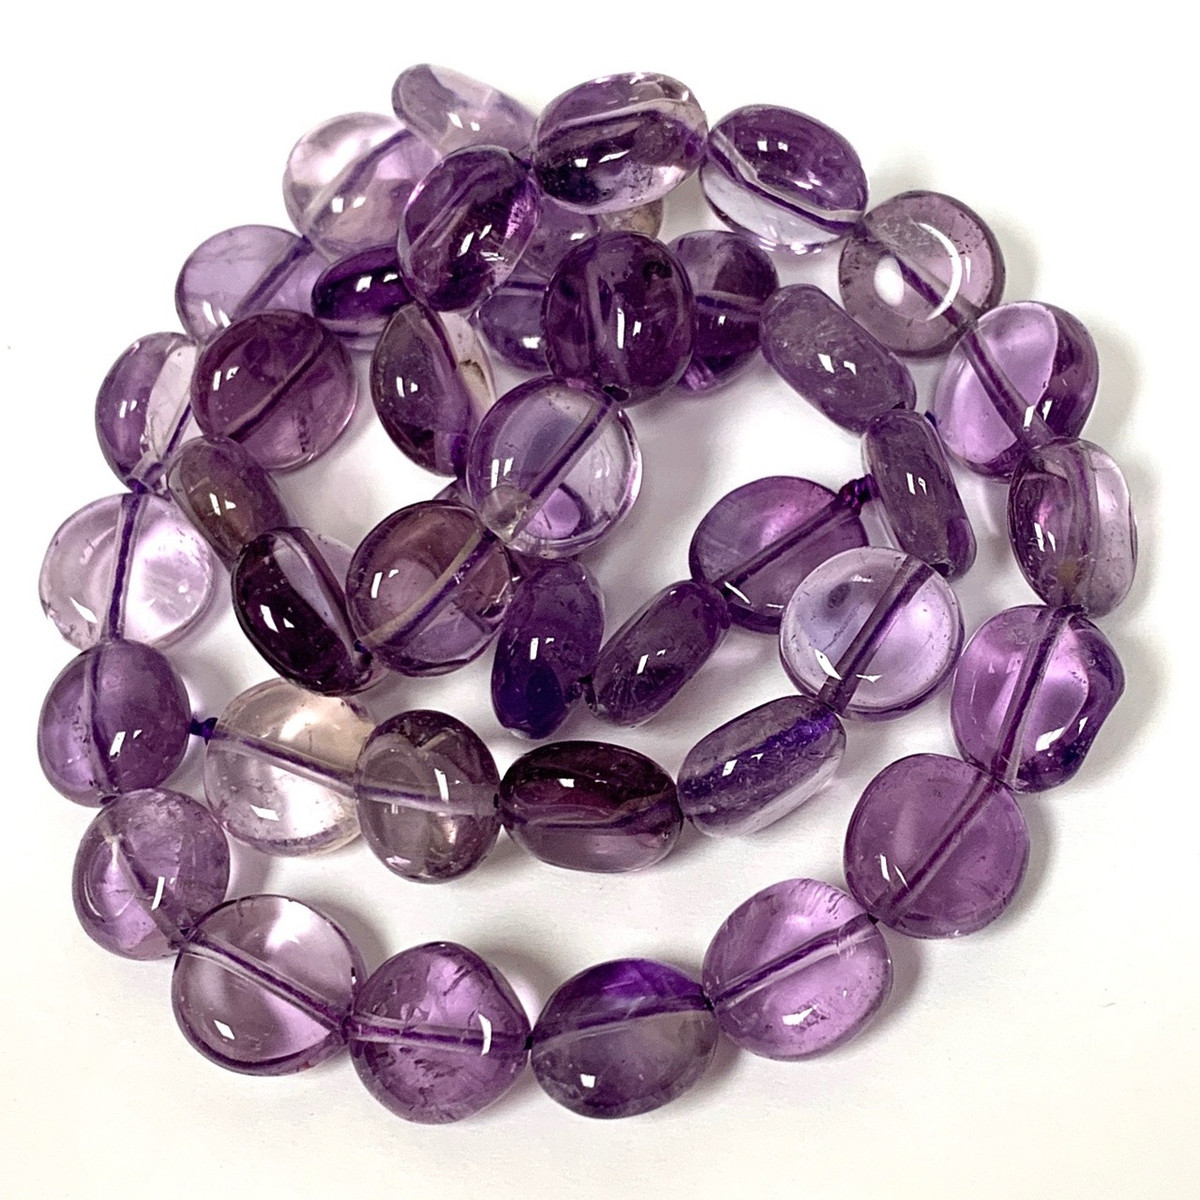 Amethyst Polished and Tumbled Flat Dime Beads 